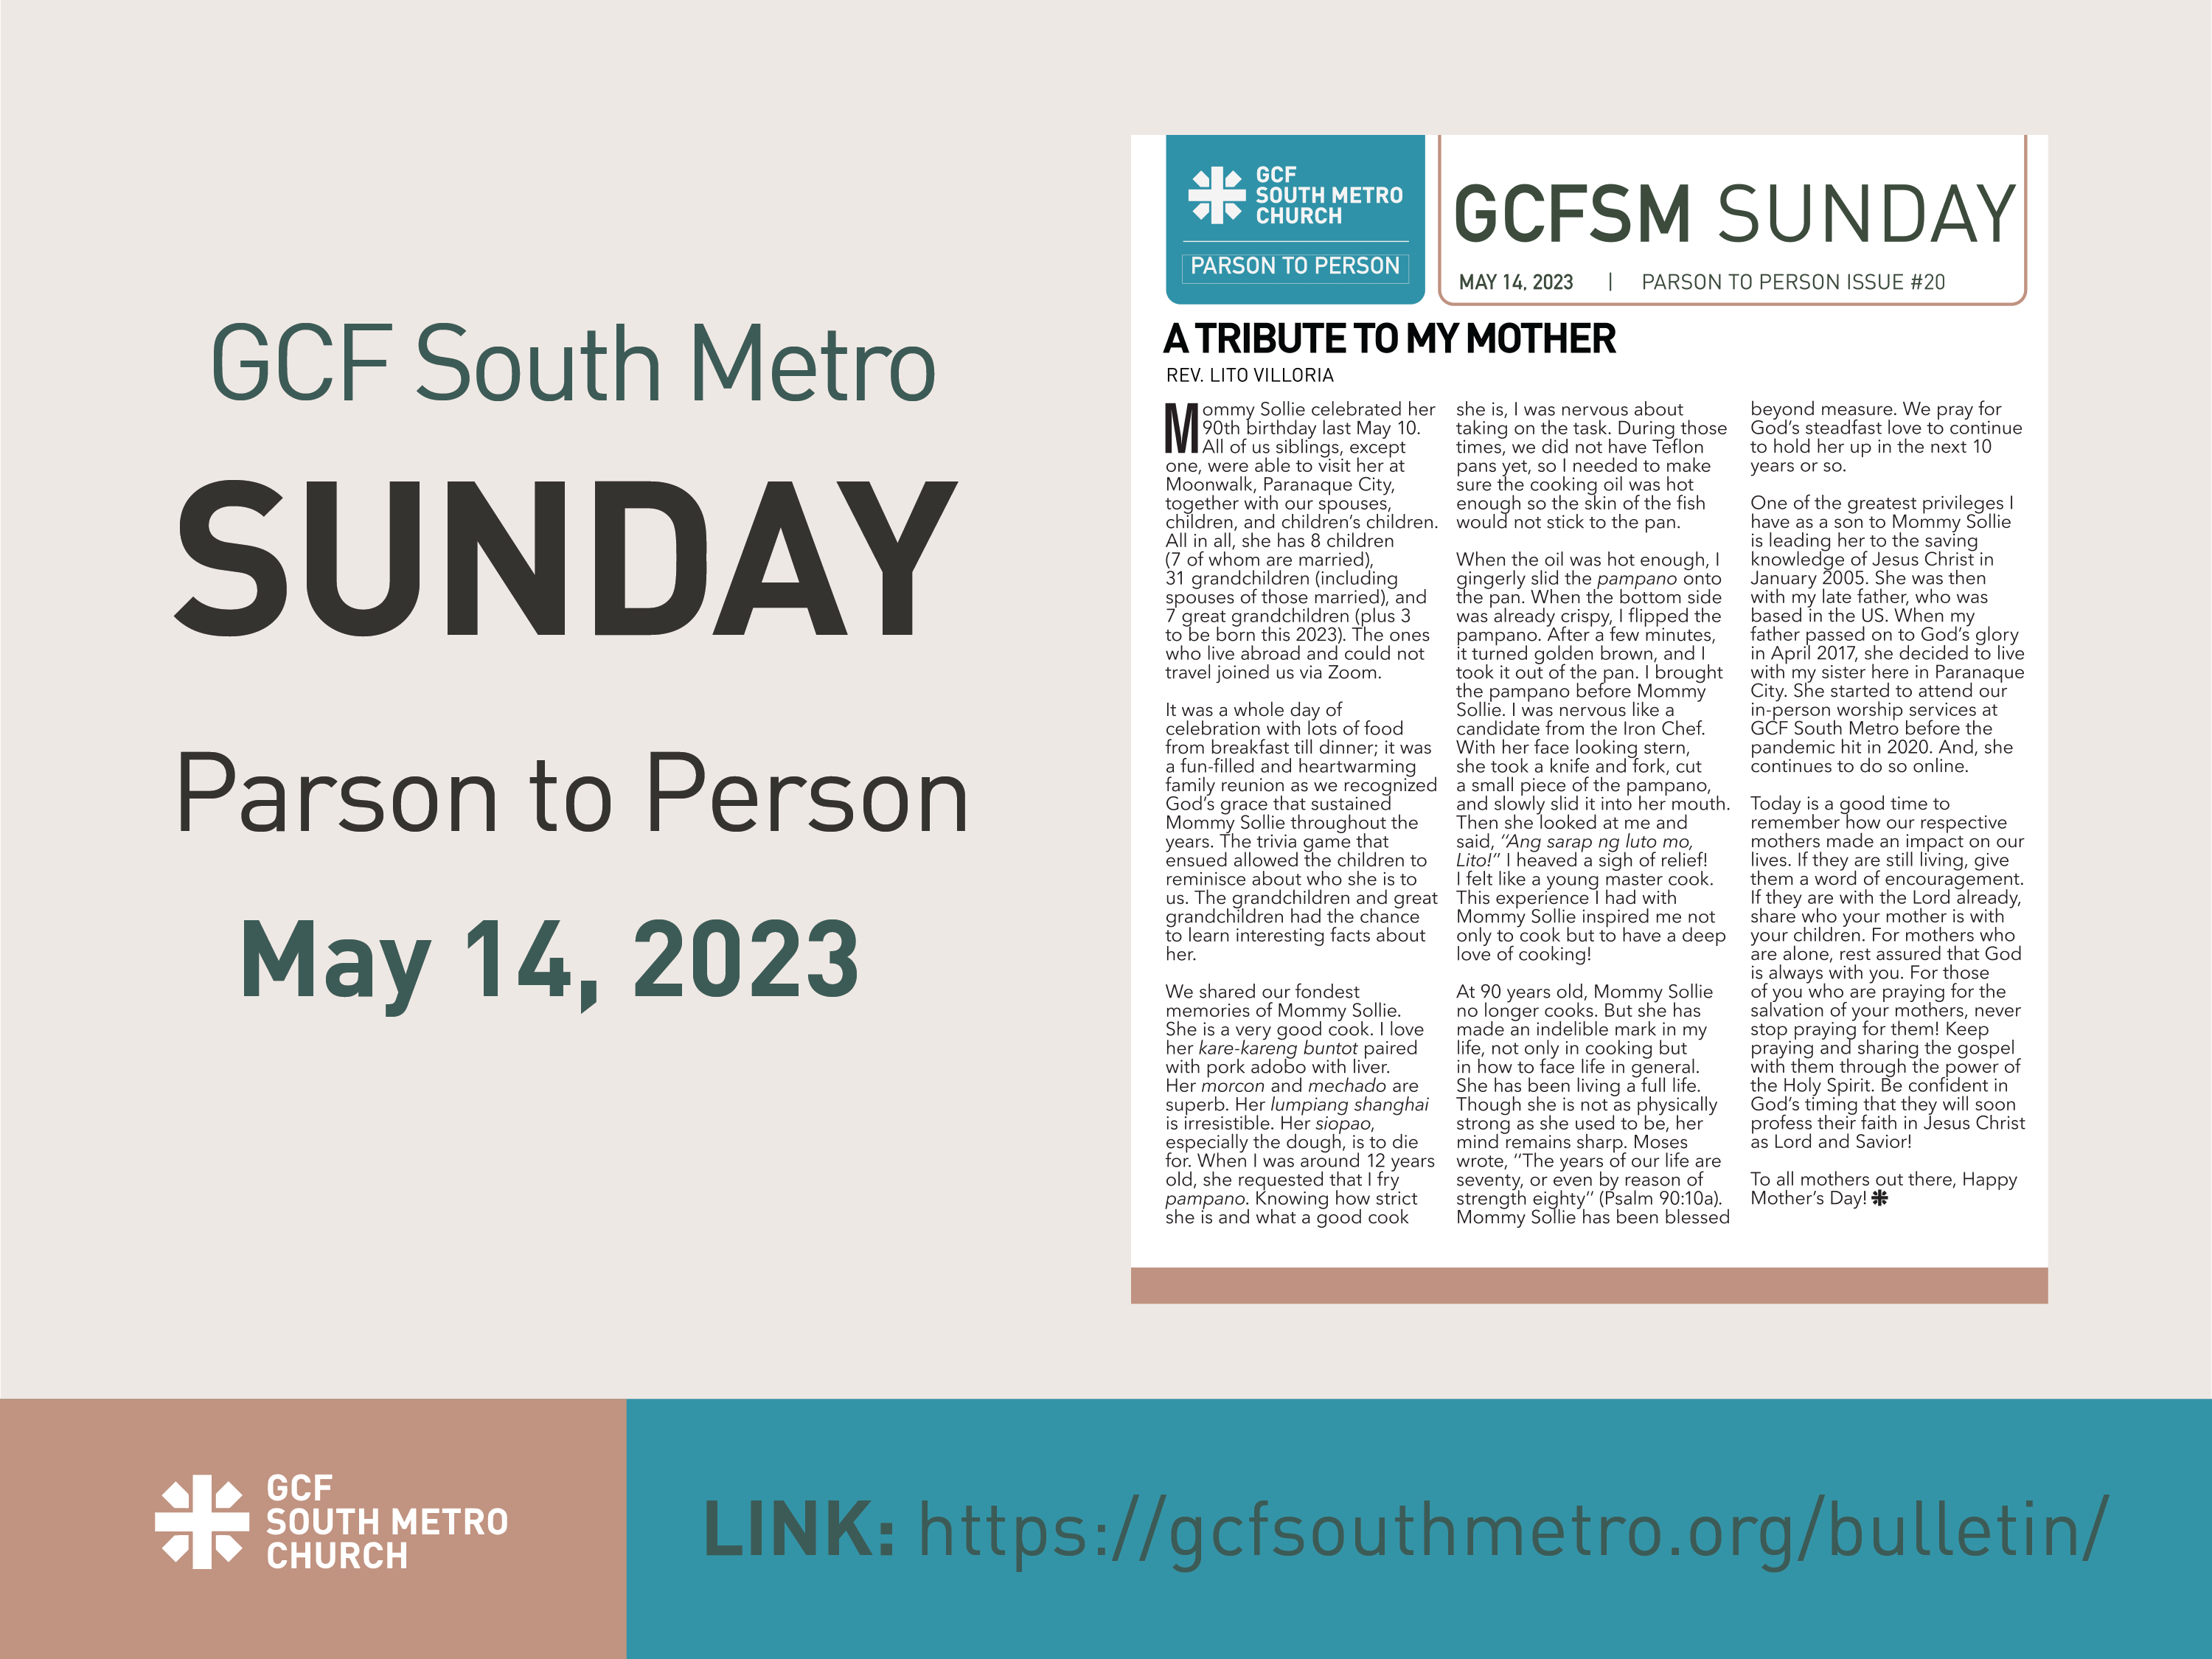 Sunday Bulletin – Parson to Person, May 14, 2023